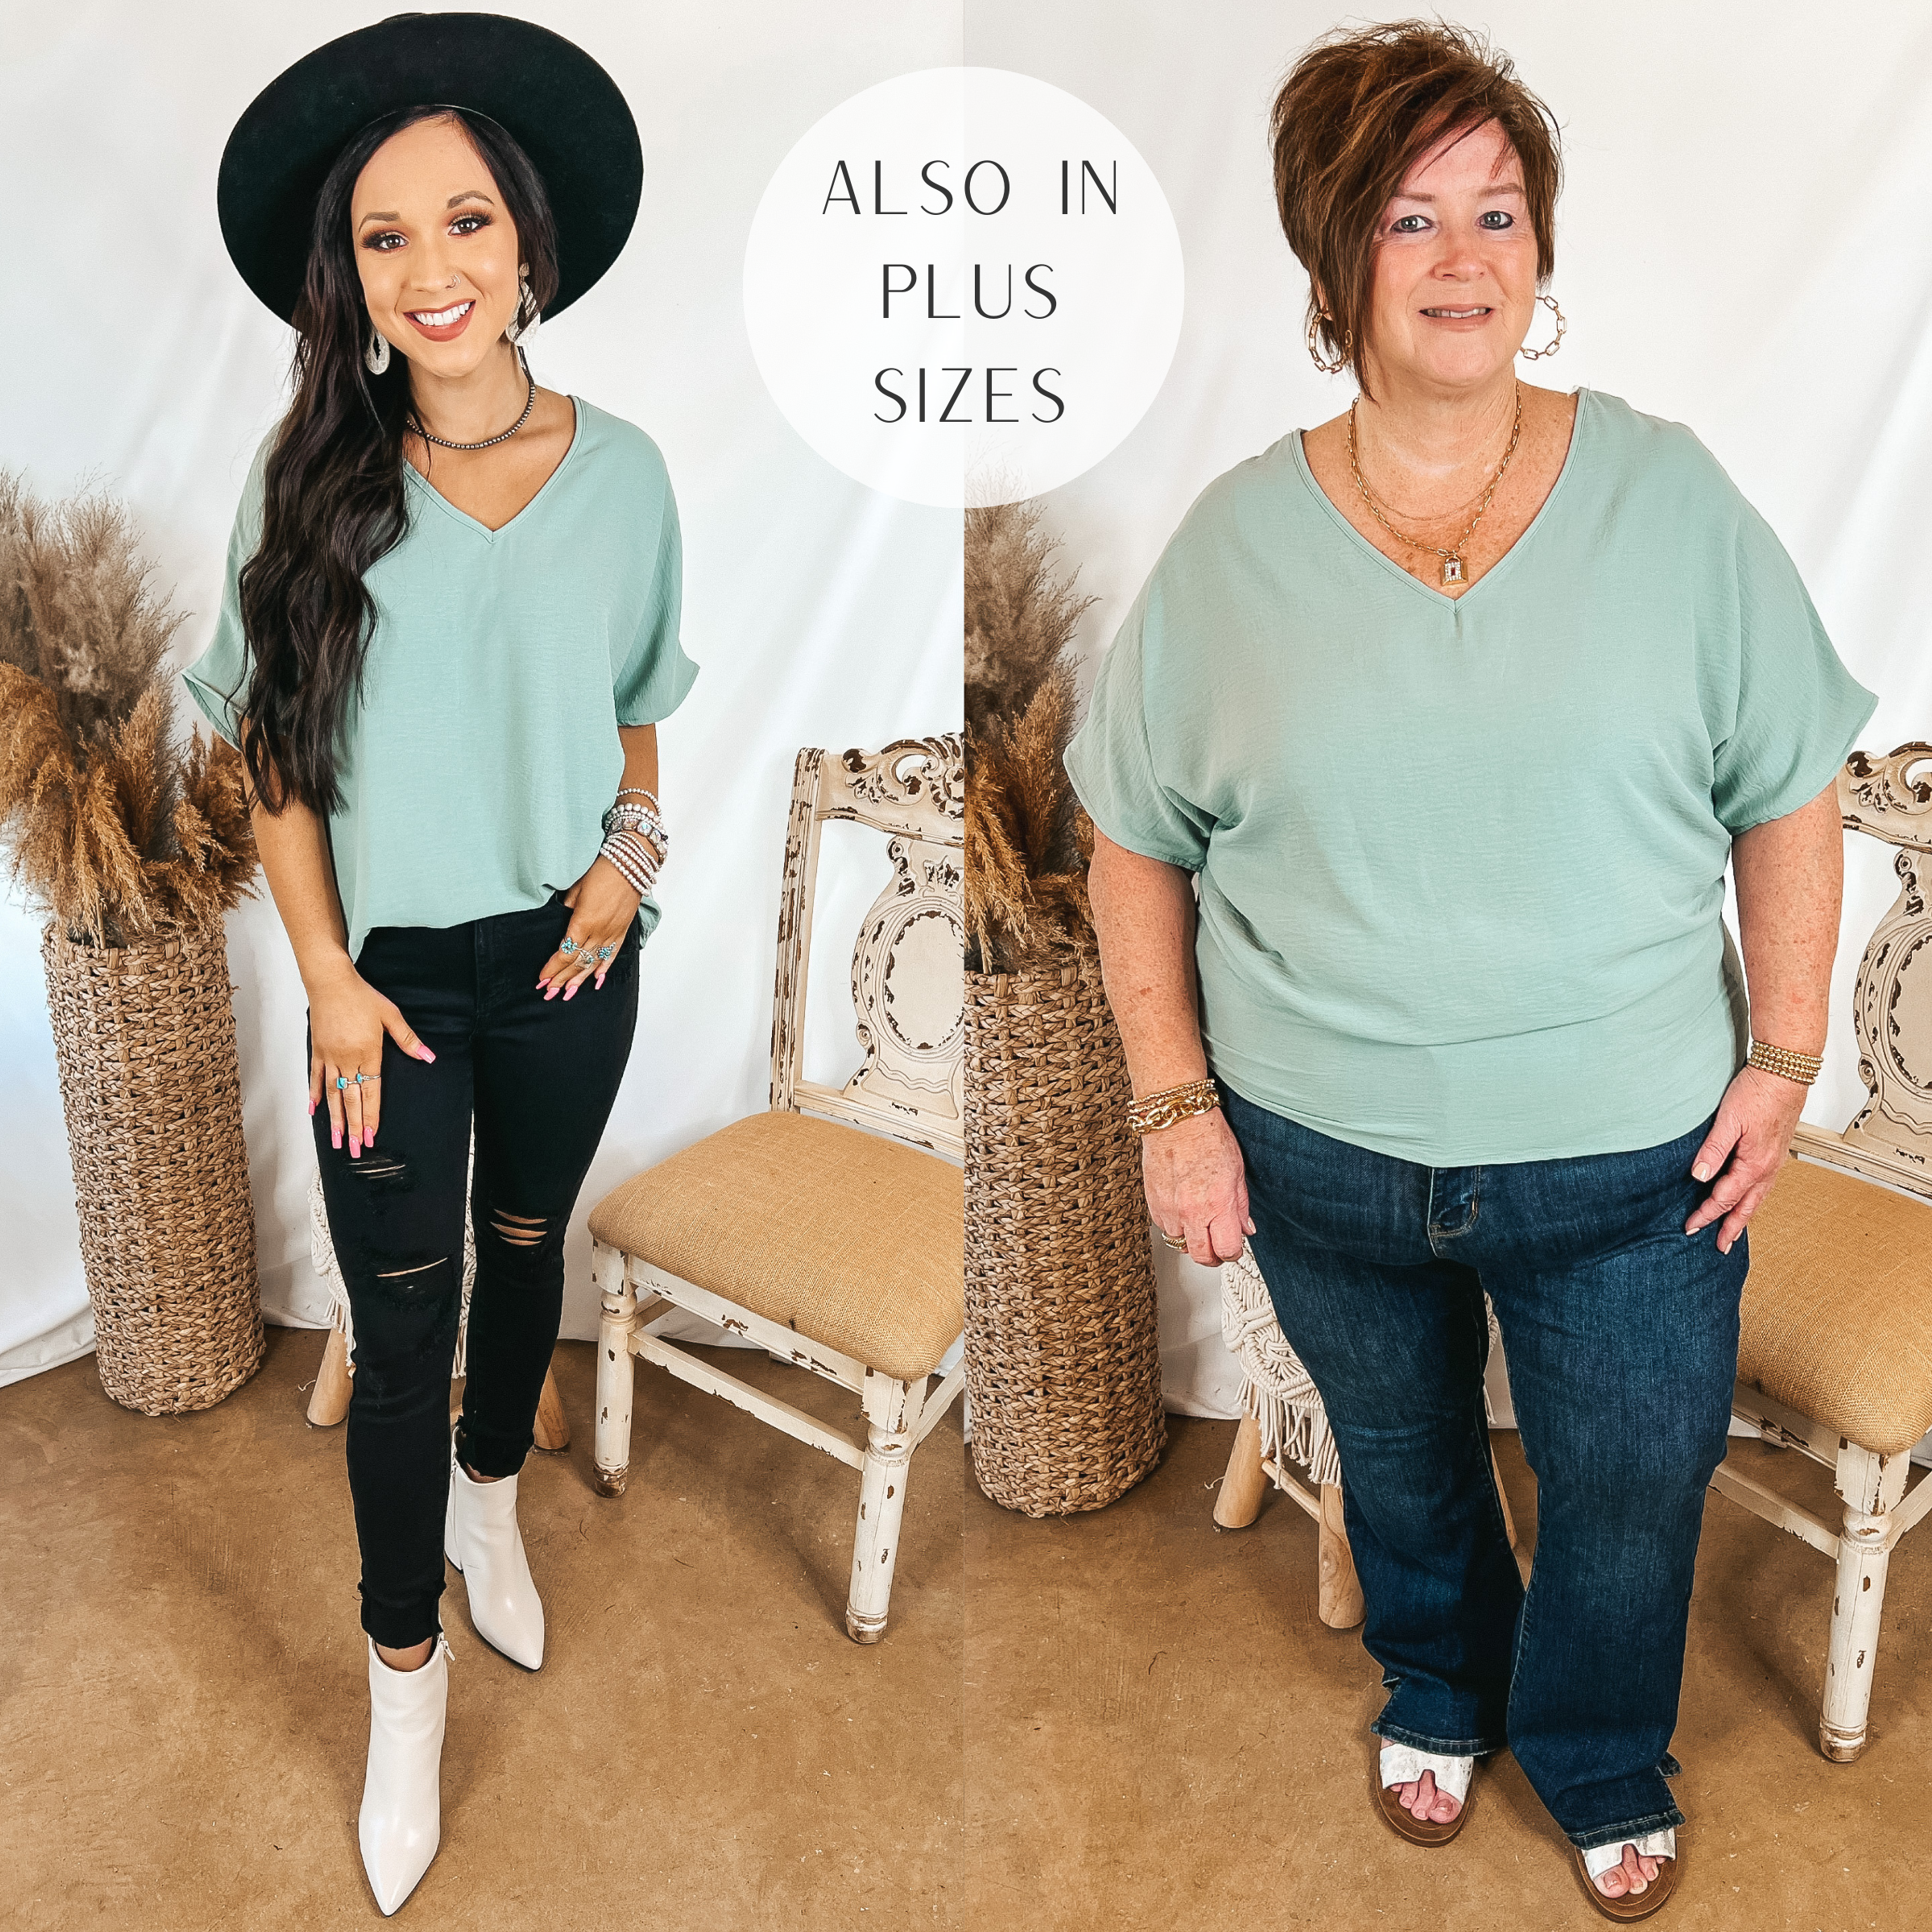 Models are wearing a mint blue v neck top that is oversized. Size small model has it paired with black skinny jeans, a black hat, and white booties. Plus size model has it paired with bootcut jeans, white sandals, and gold jewelry.